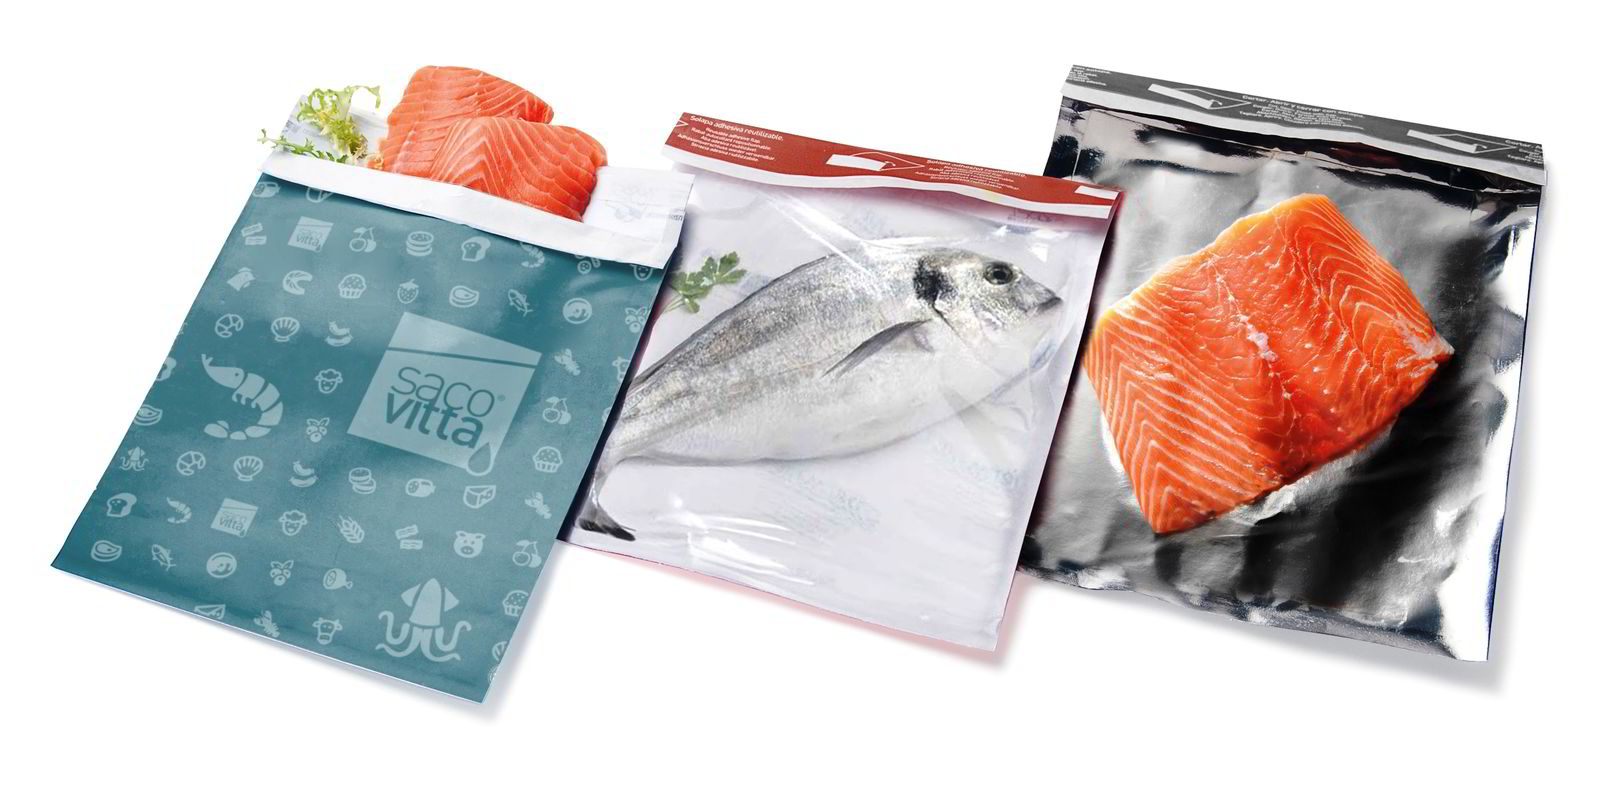 Spanish packaging firm targeting EU retailers with fresh fish bags